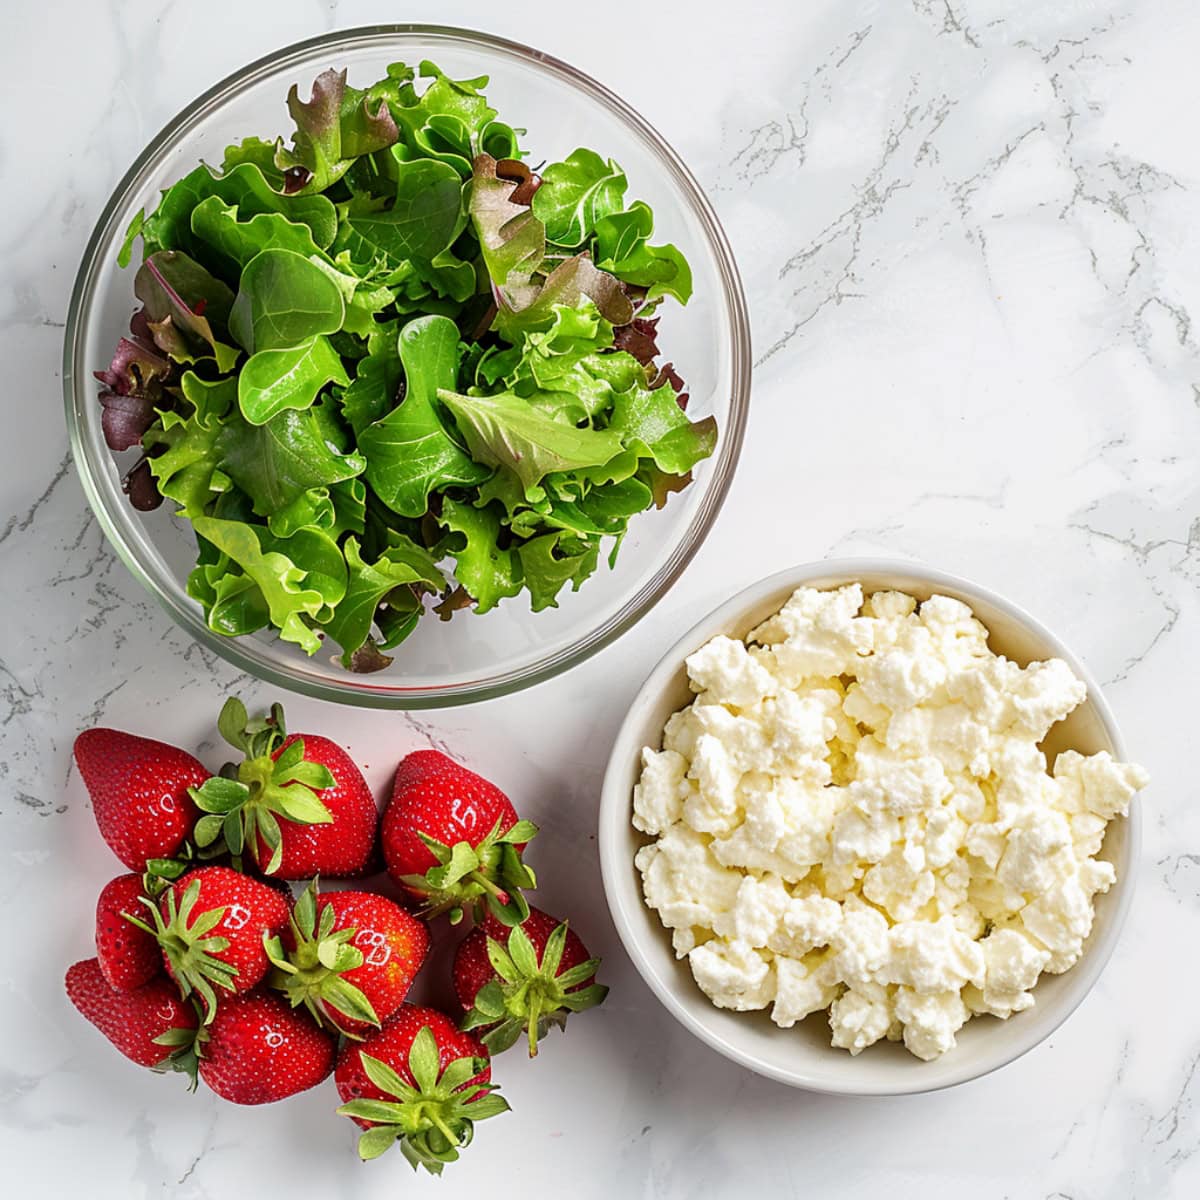 Mixed greens, fresh strawberries and crumbled feta cheese arranged on a white marble table.